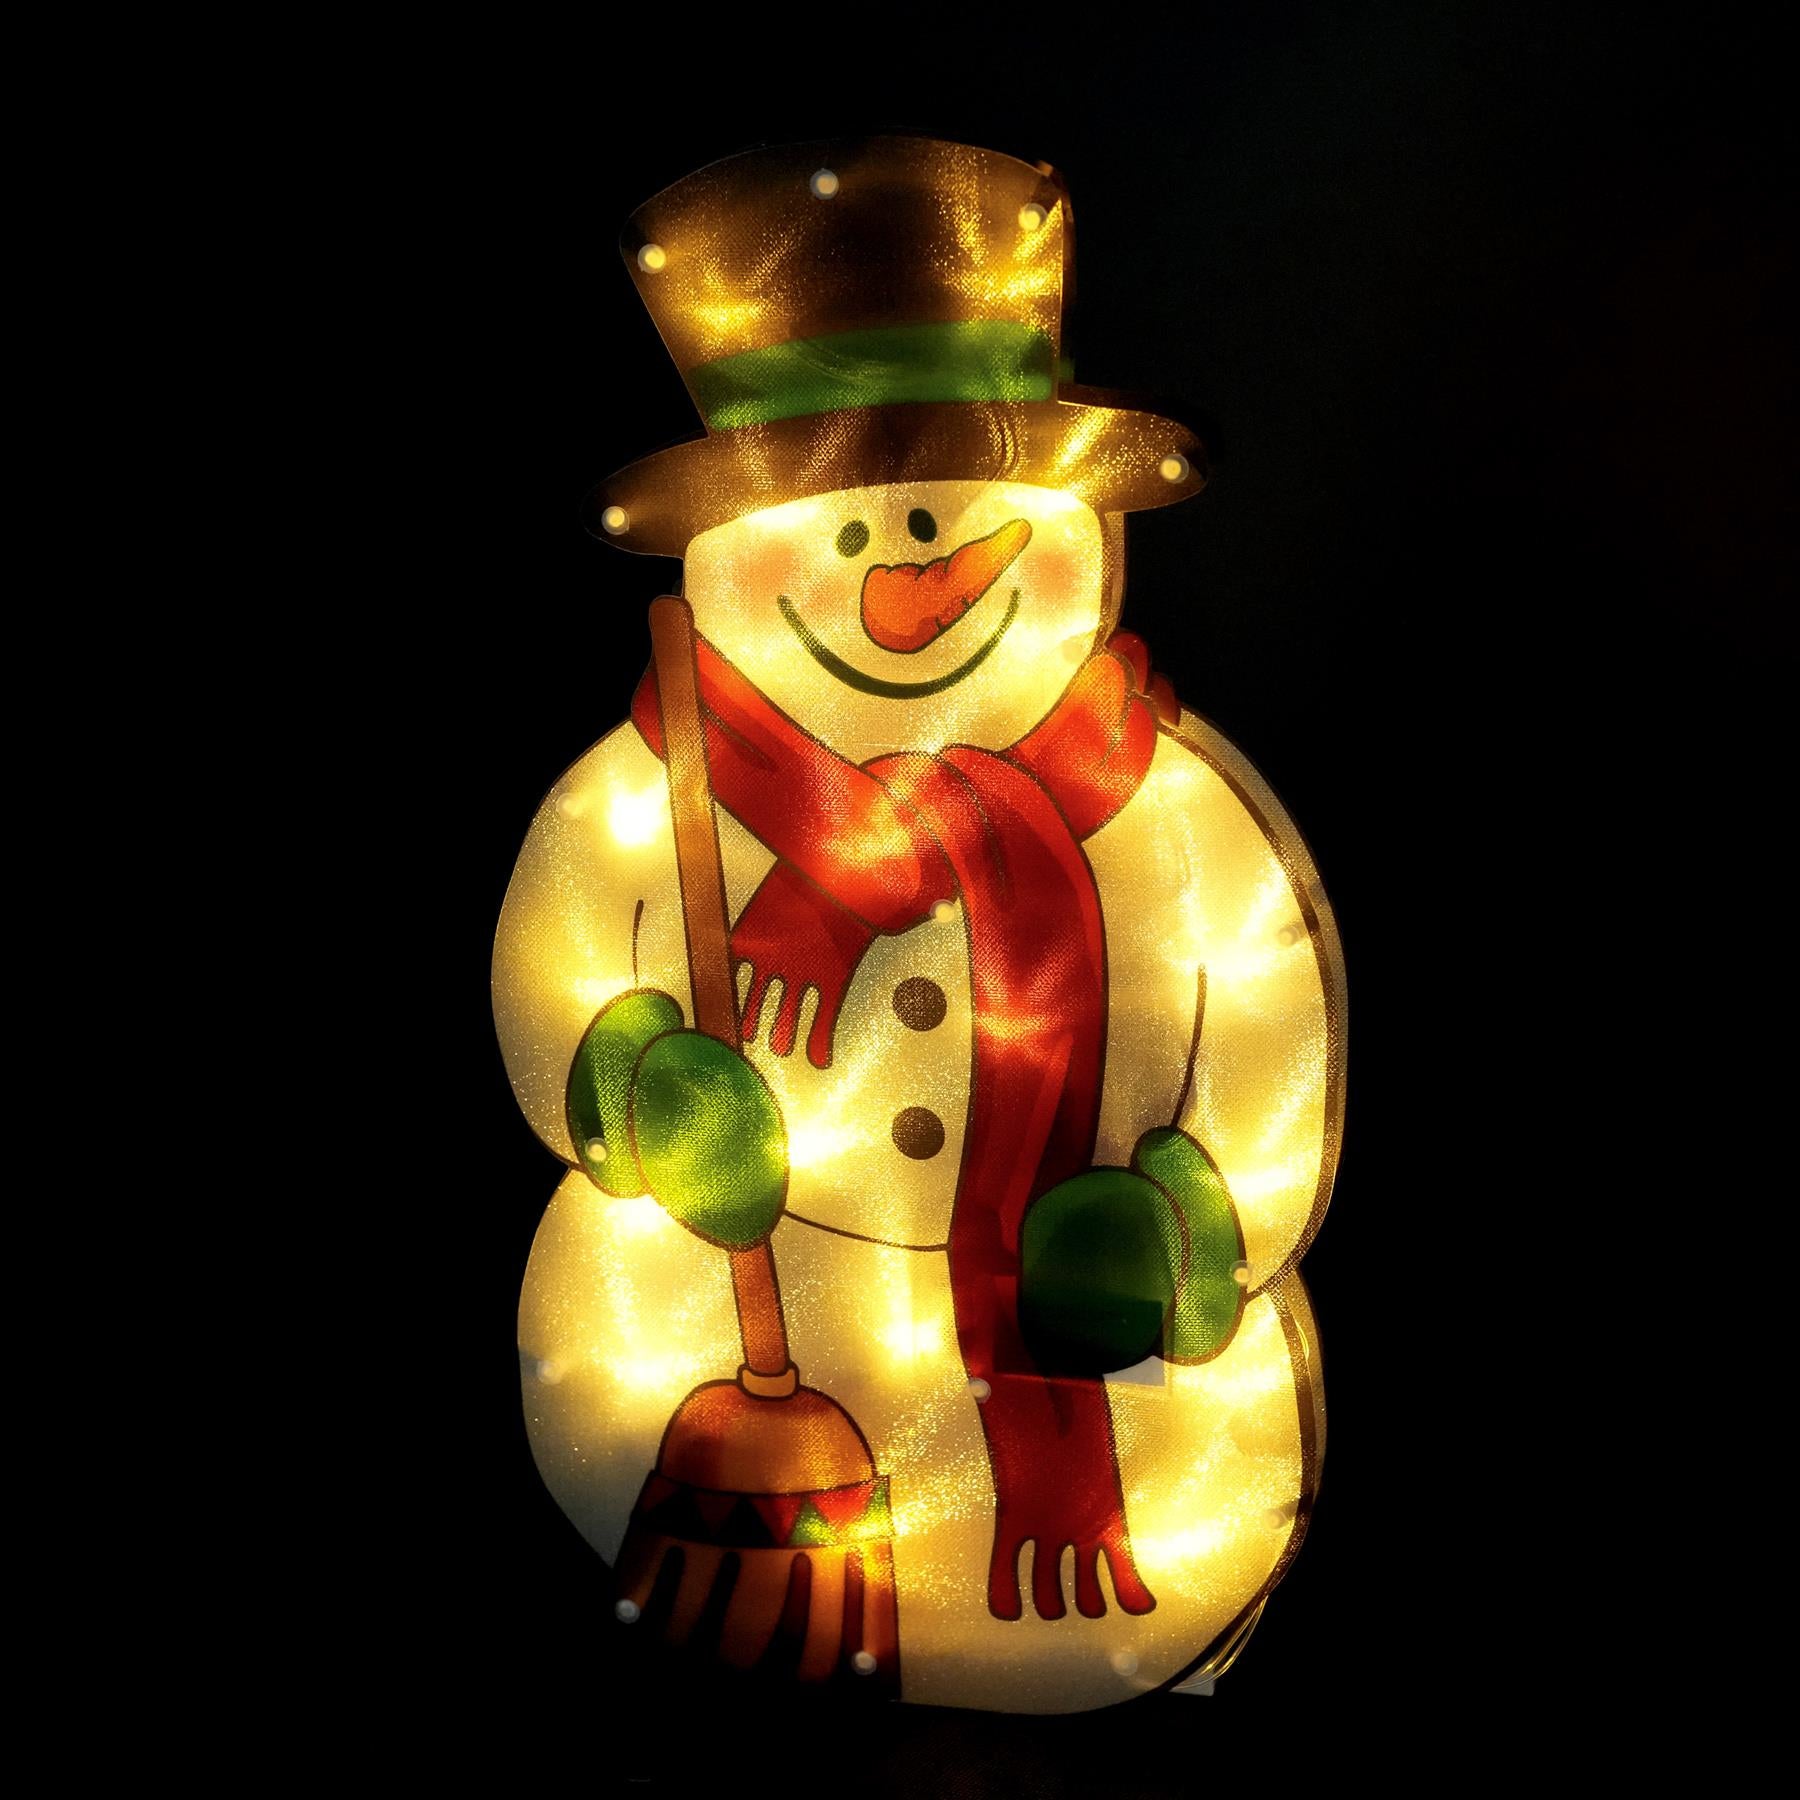 Snowman with Broom Sign Christmas LED Light Silhouette by The Magic Toy Shop - UKBuyZone